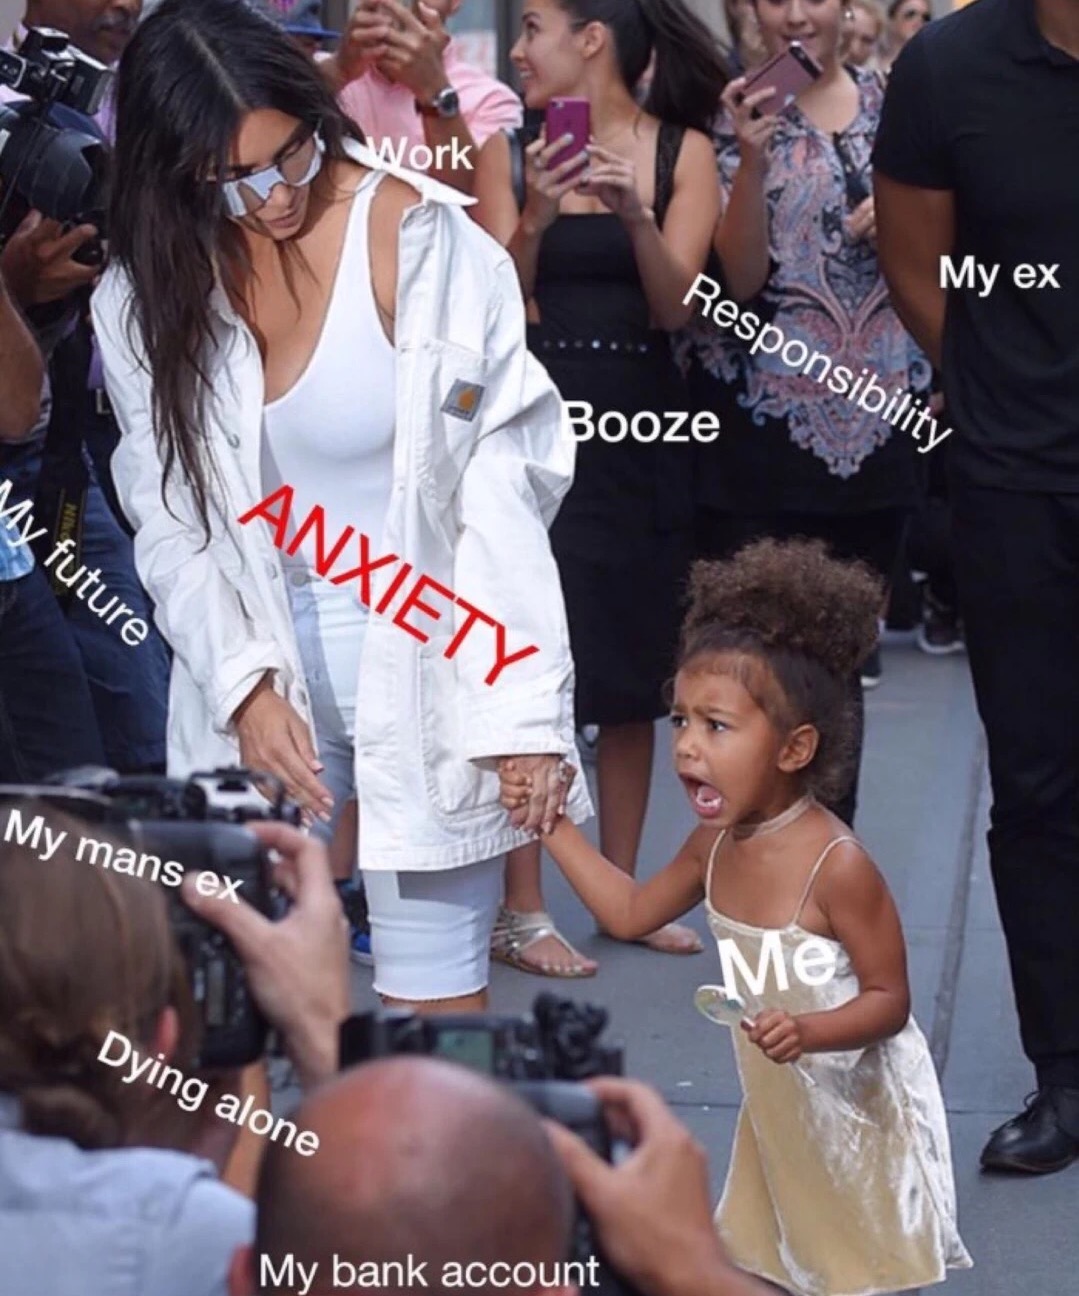 memes - north west throws tantrum - Work Responsibility My ex Booze Anxiety My future My mans ex Me Dying alone My bank account